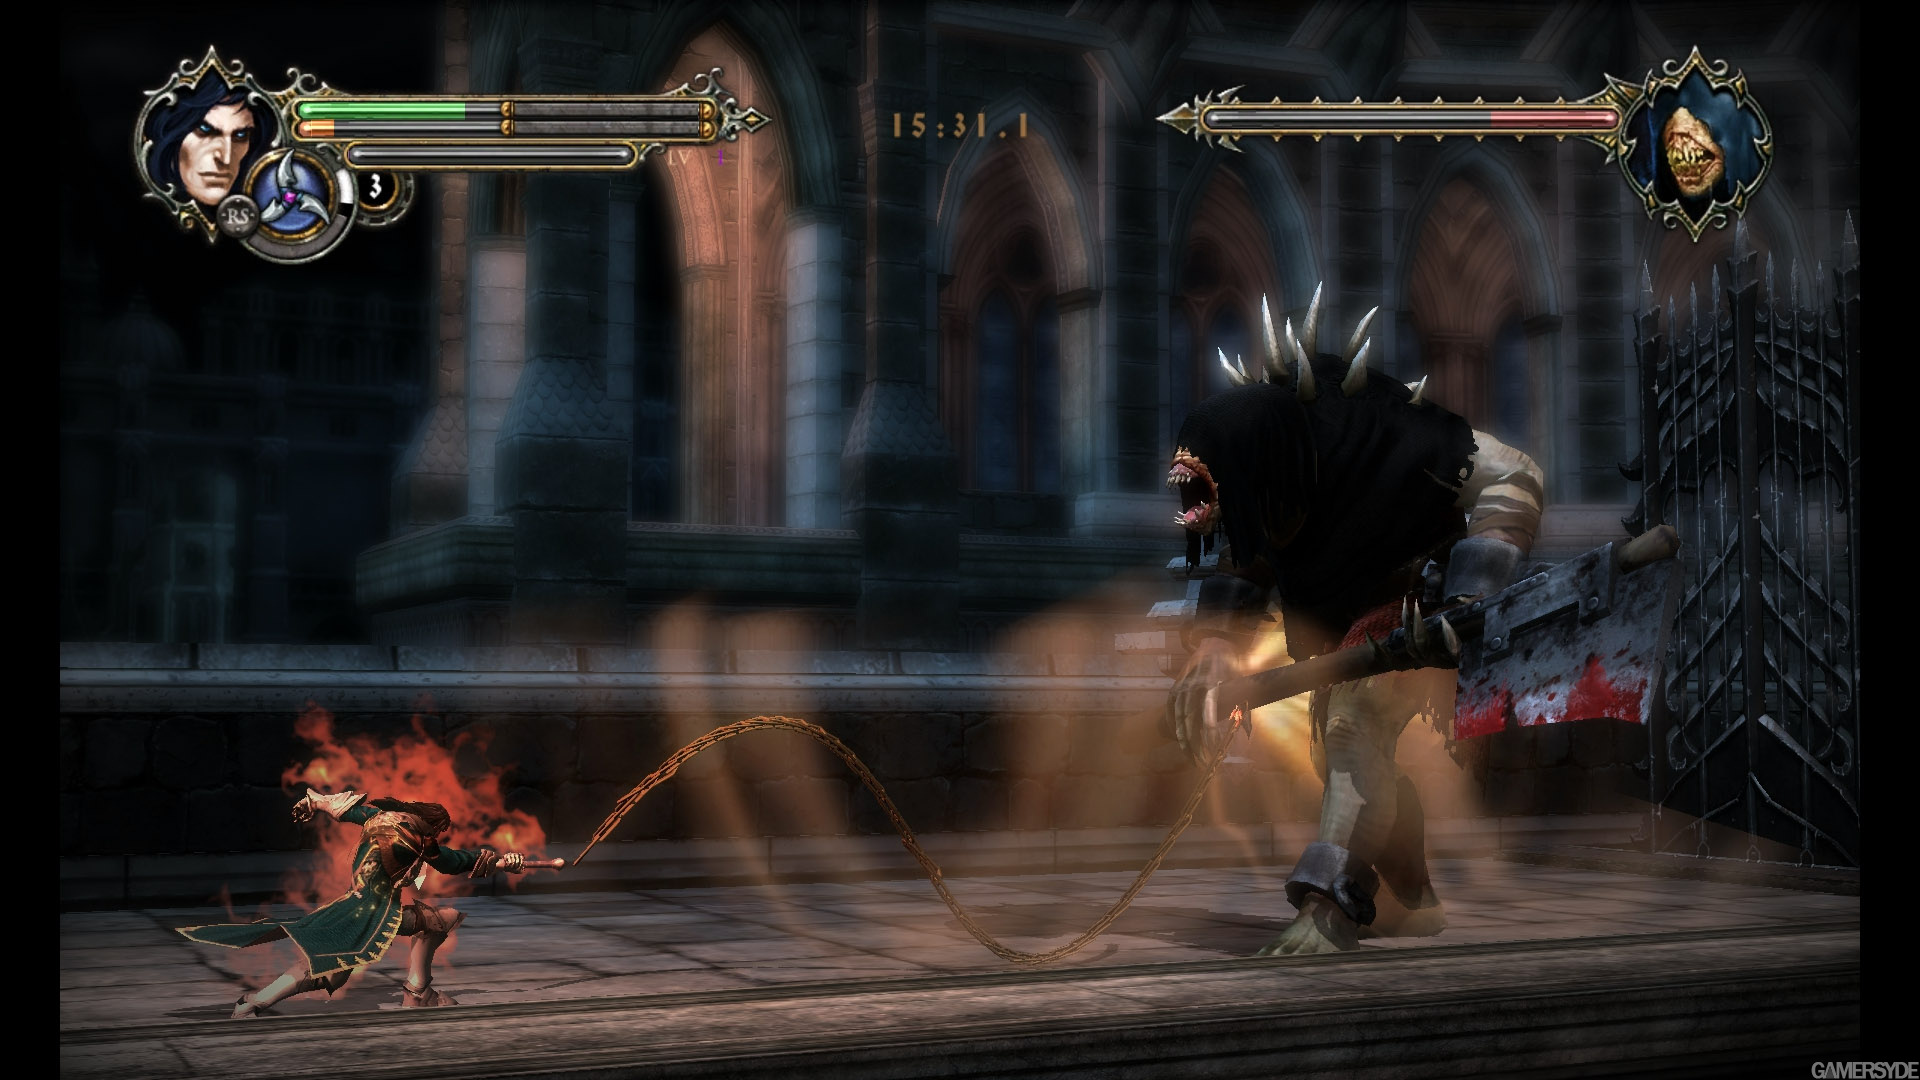 Castlevania Producer Talks Lords Of Shadow 2 And Mirror Of Fate - Game  Informer